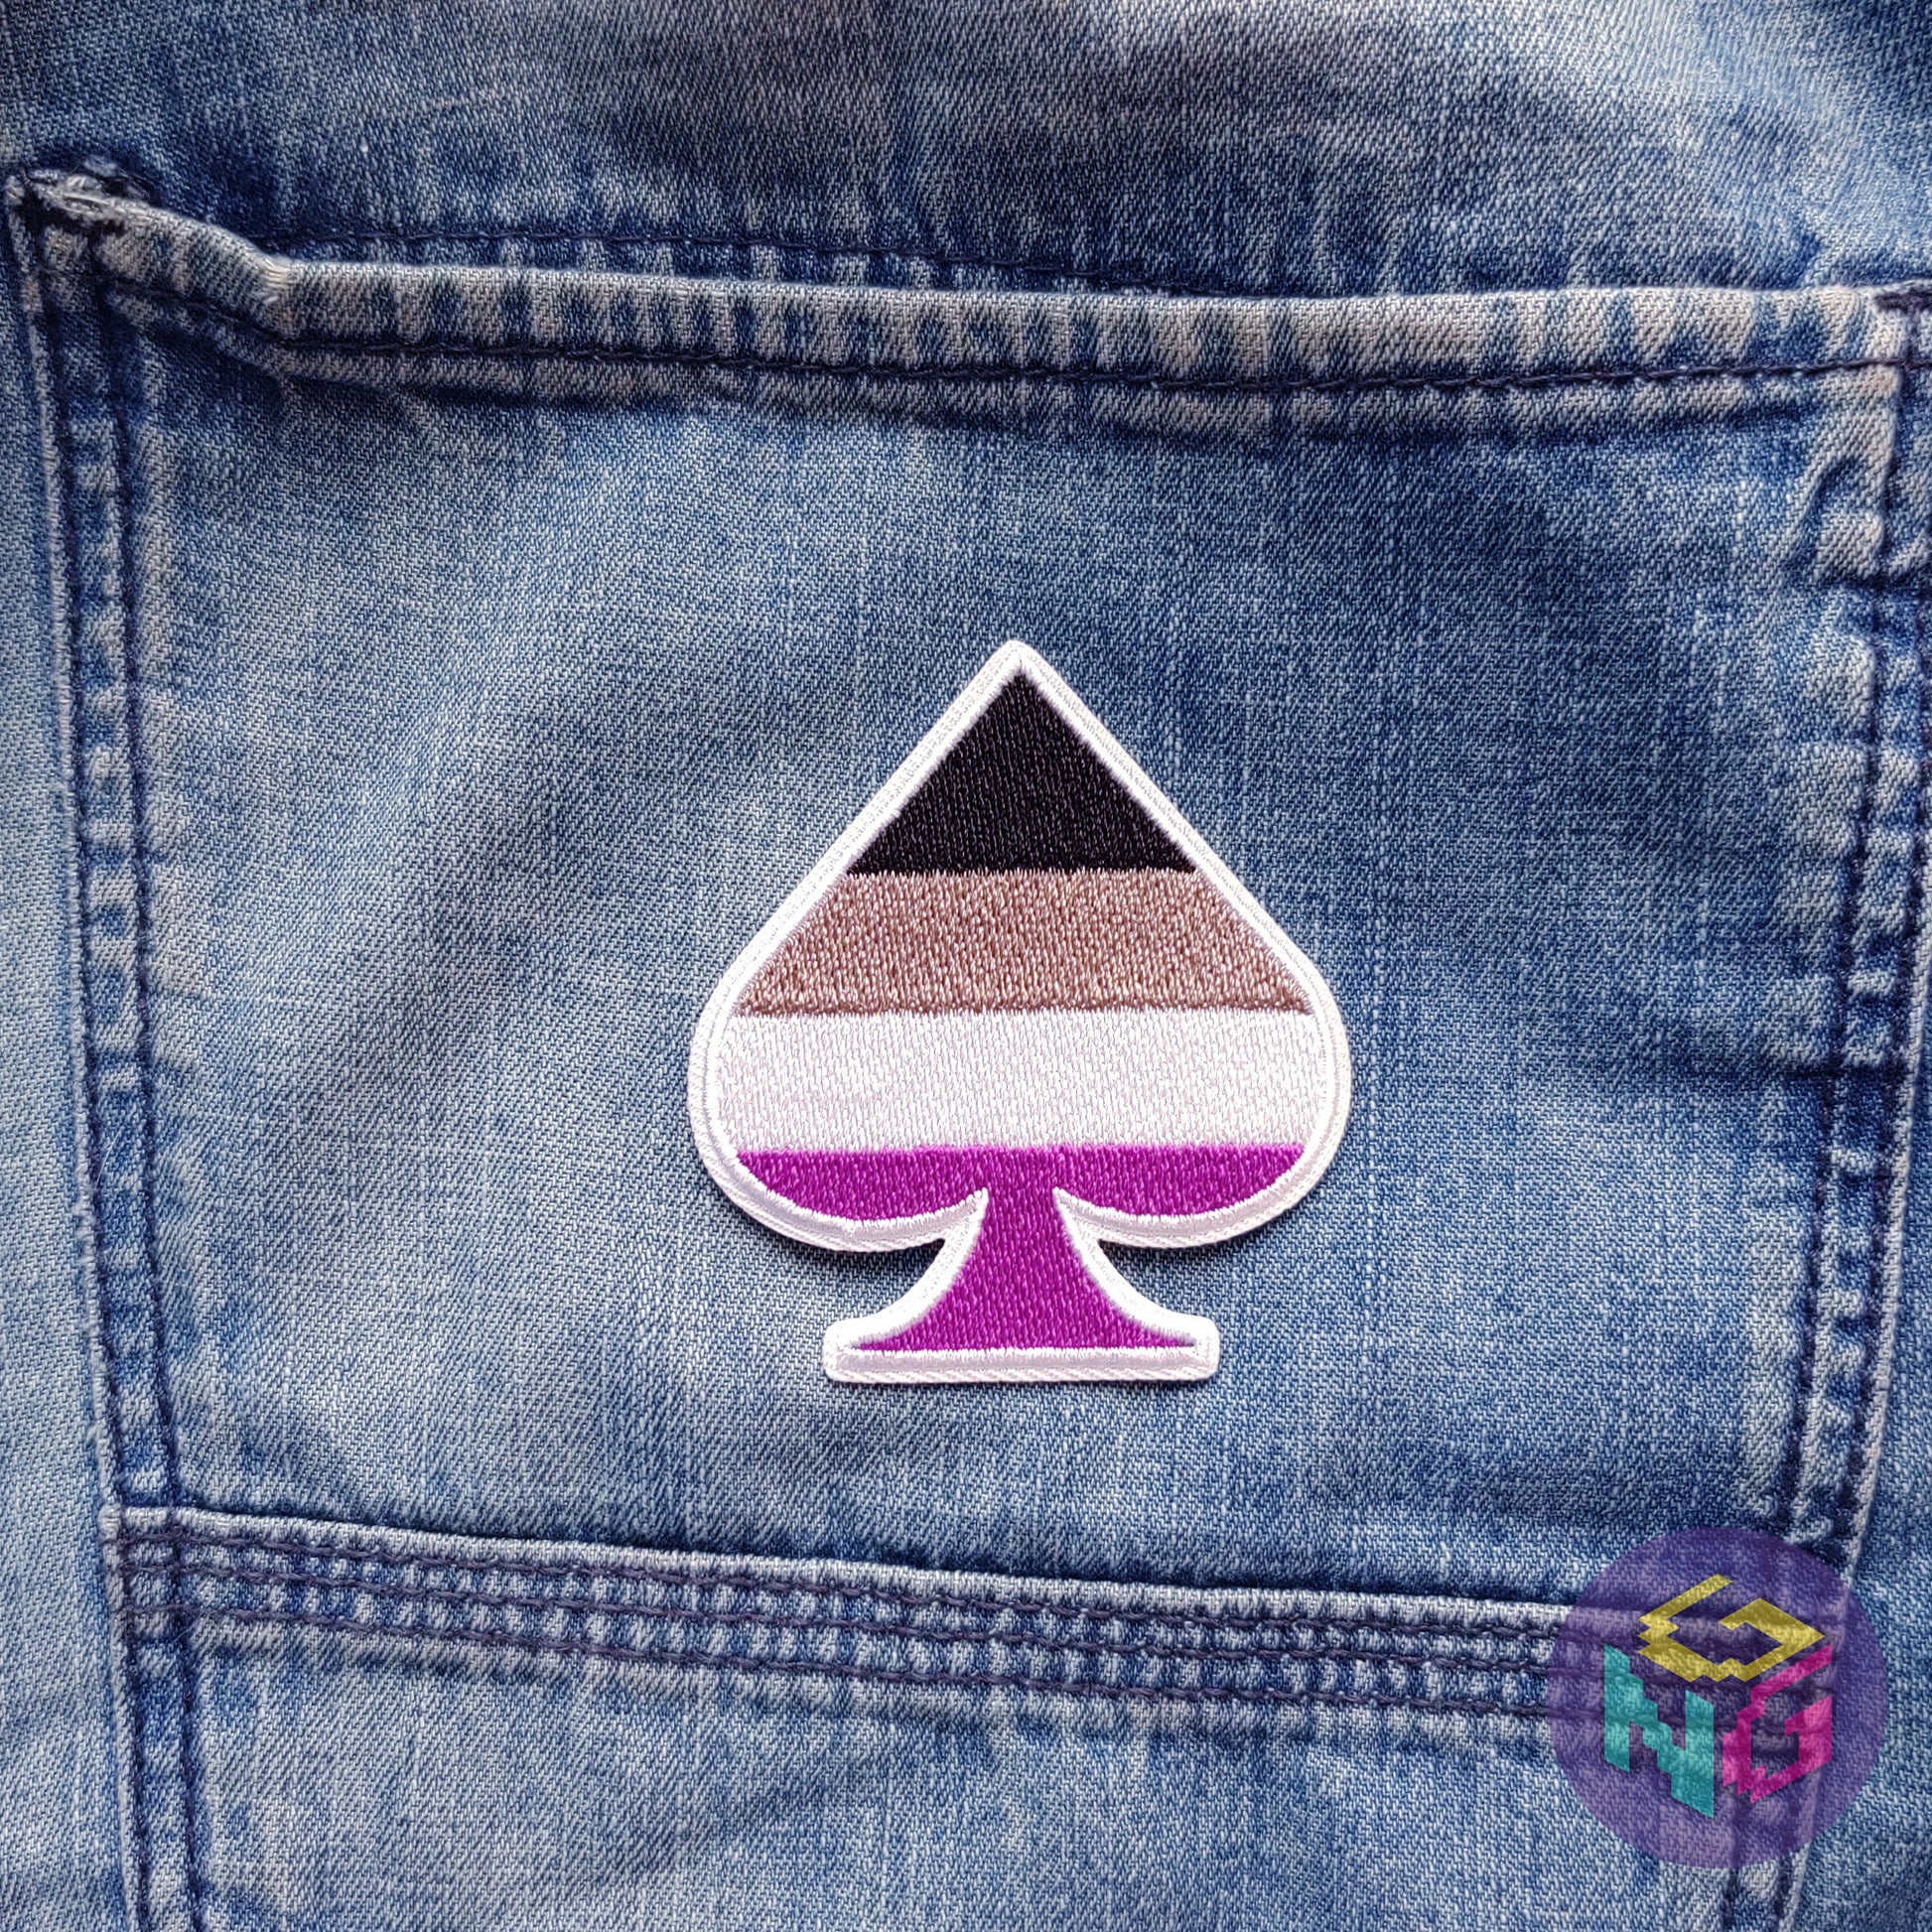 asexual patch lying flat on blue denim background